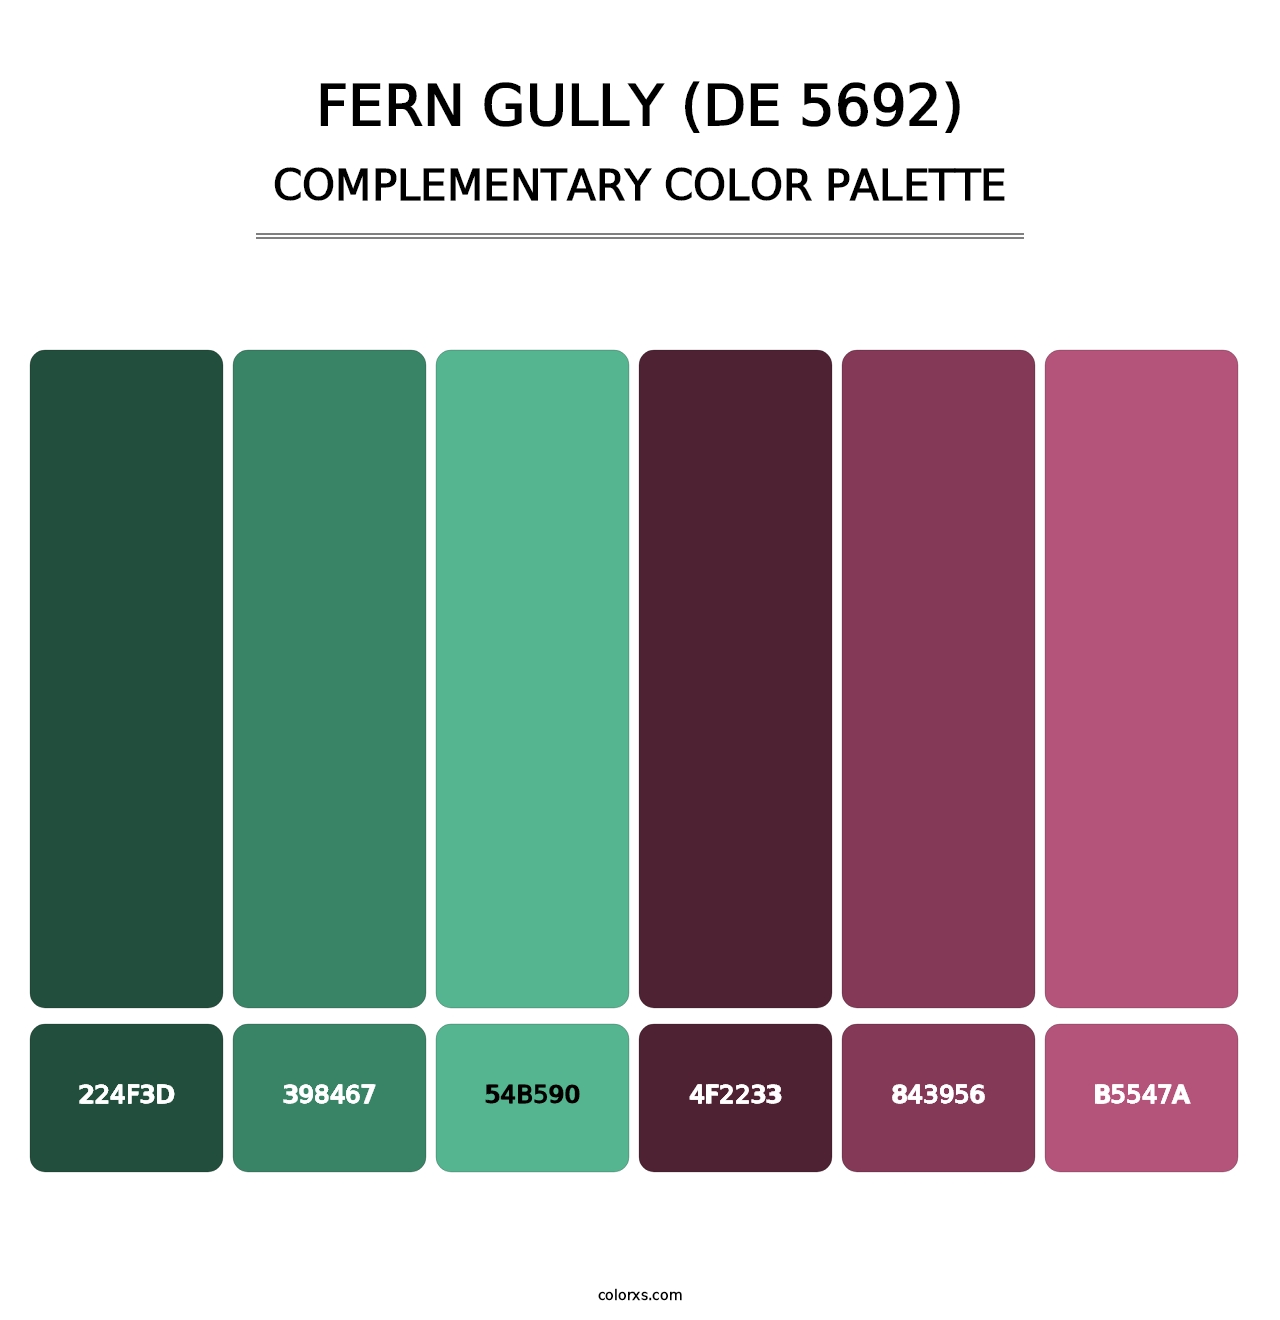 Fern Gully (DE 5692) - Complementary Color Palette